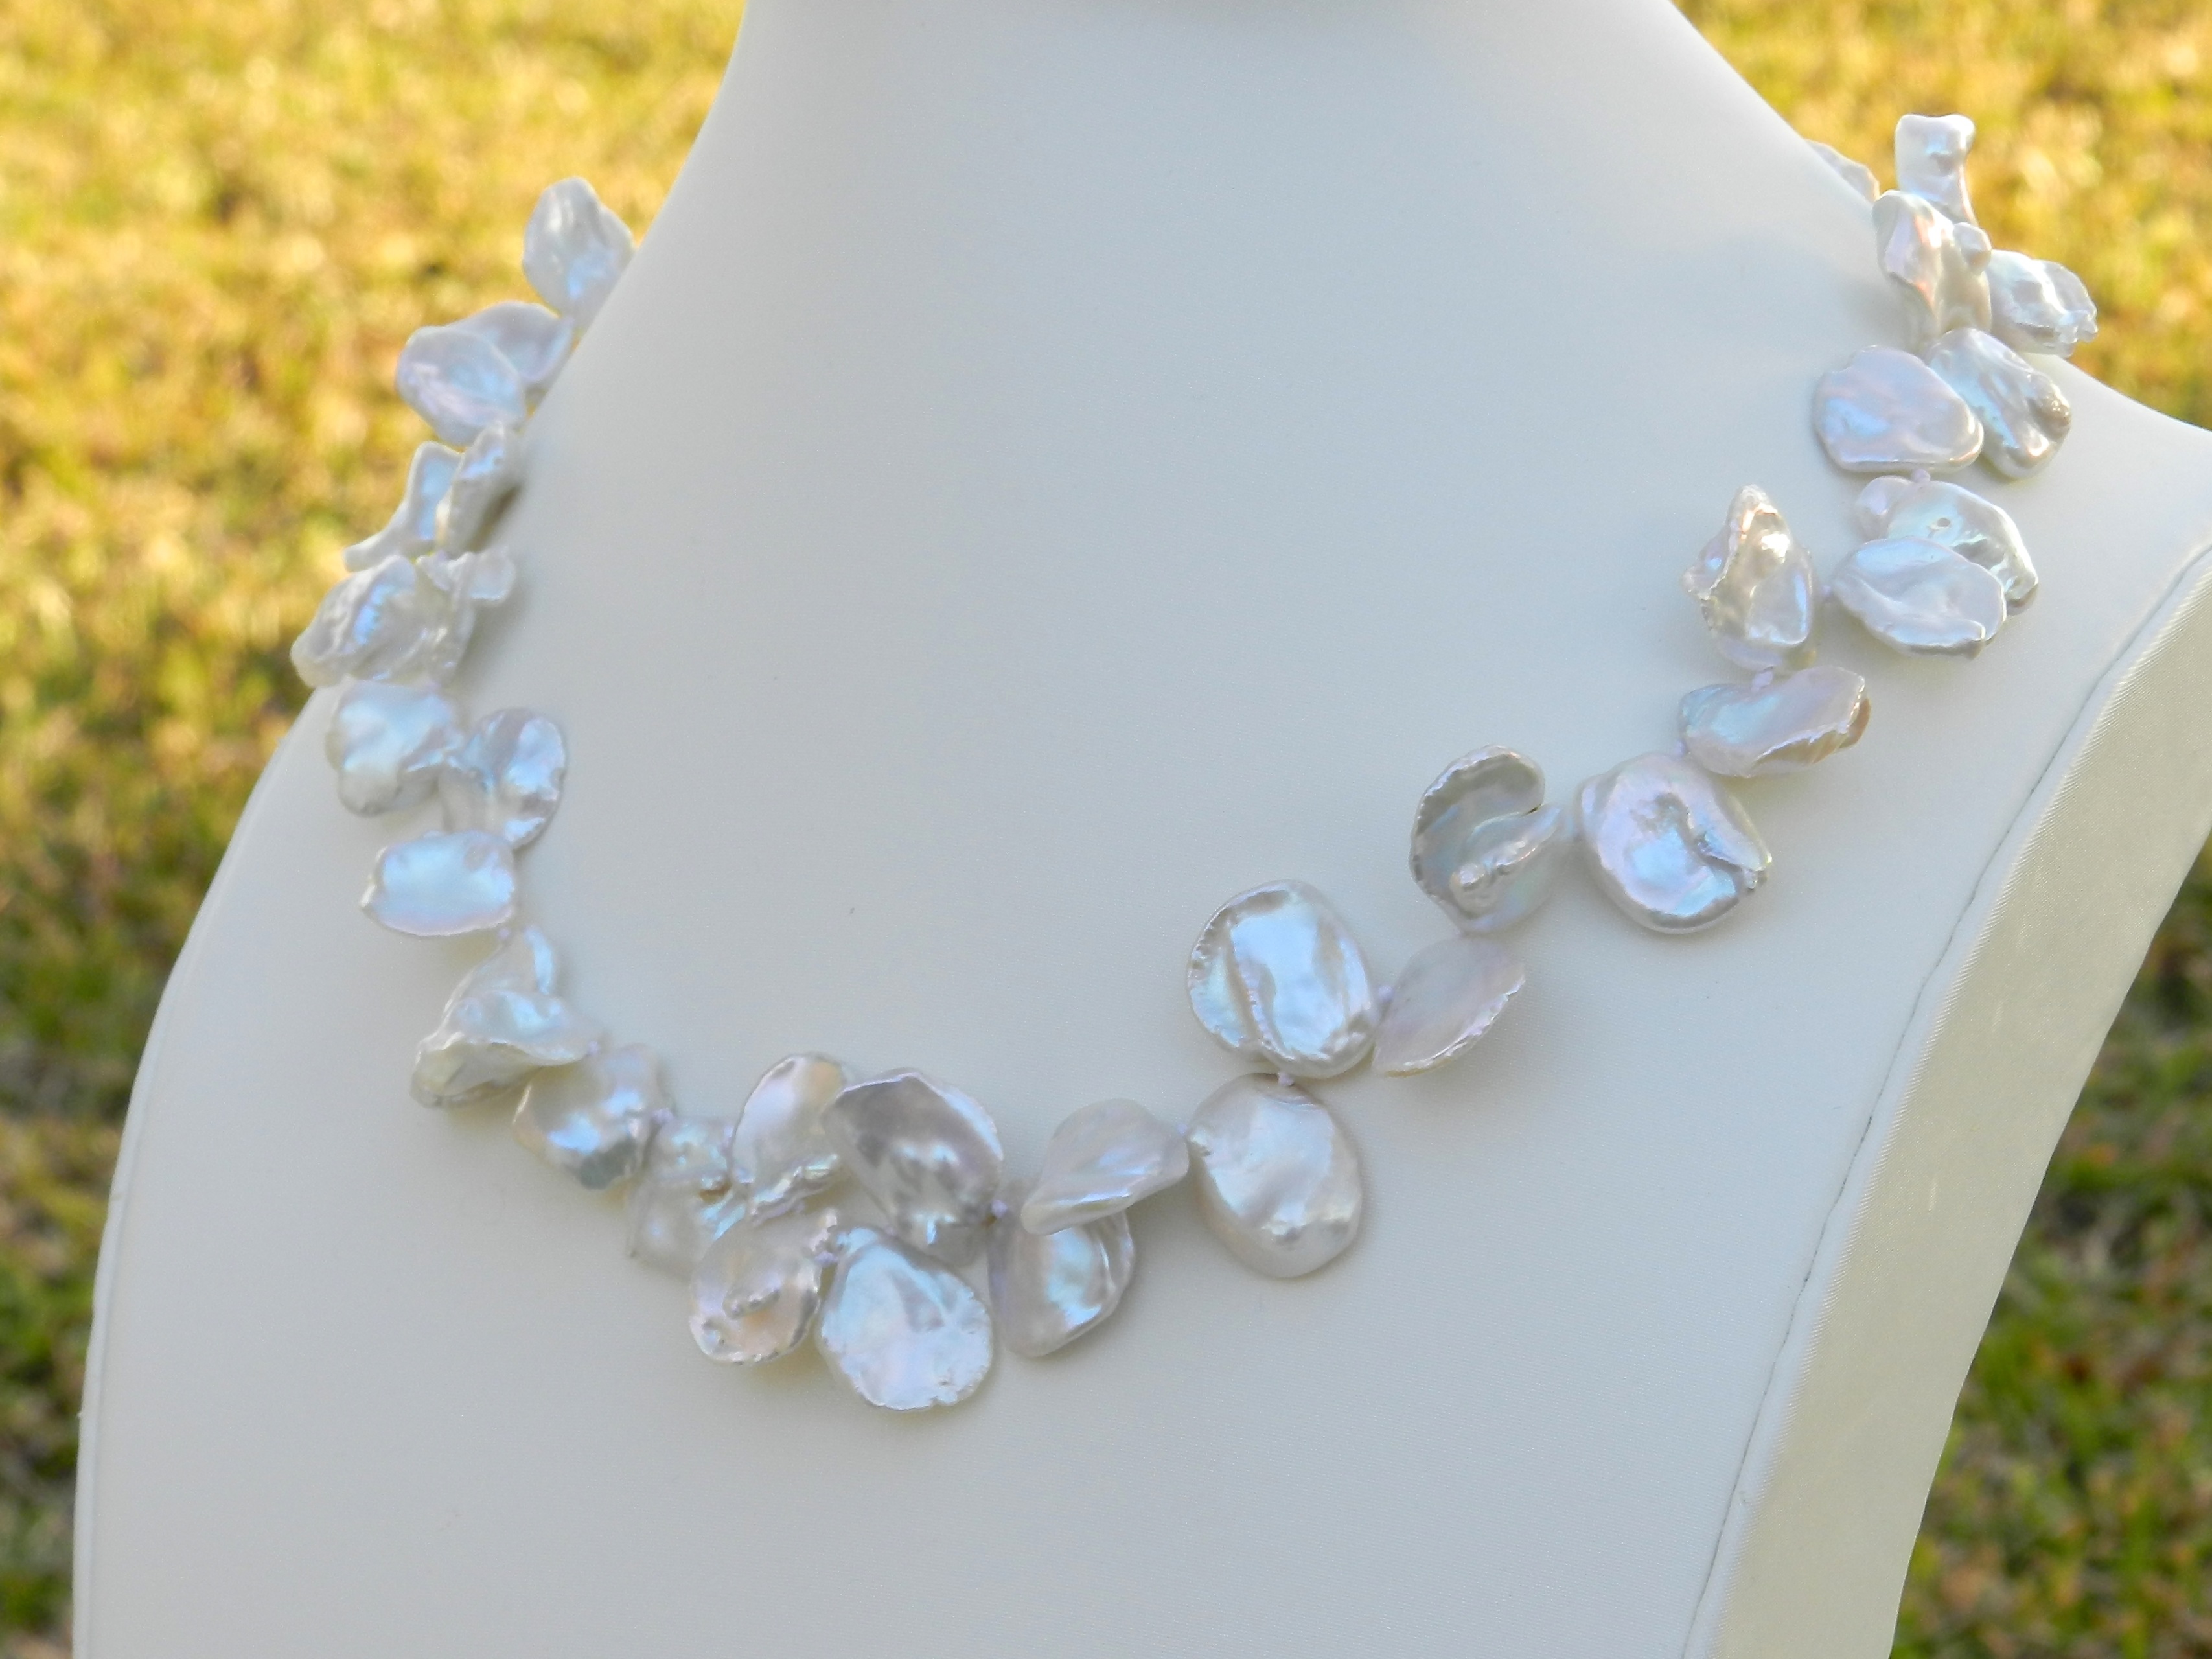 WHITE KESHI FLORAL PEARL NECKLACE – Maarz Pearls